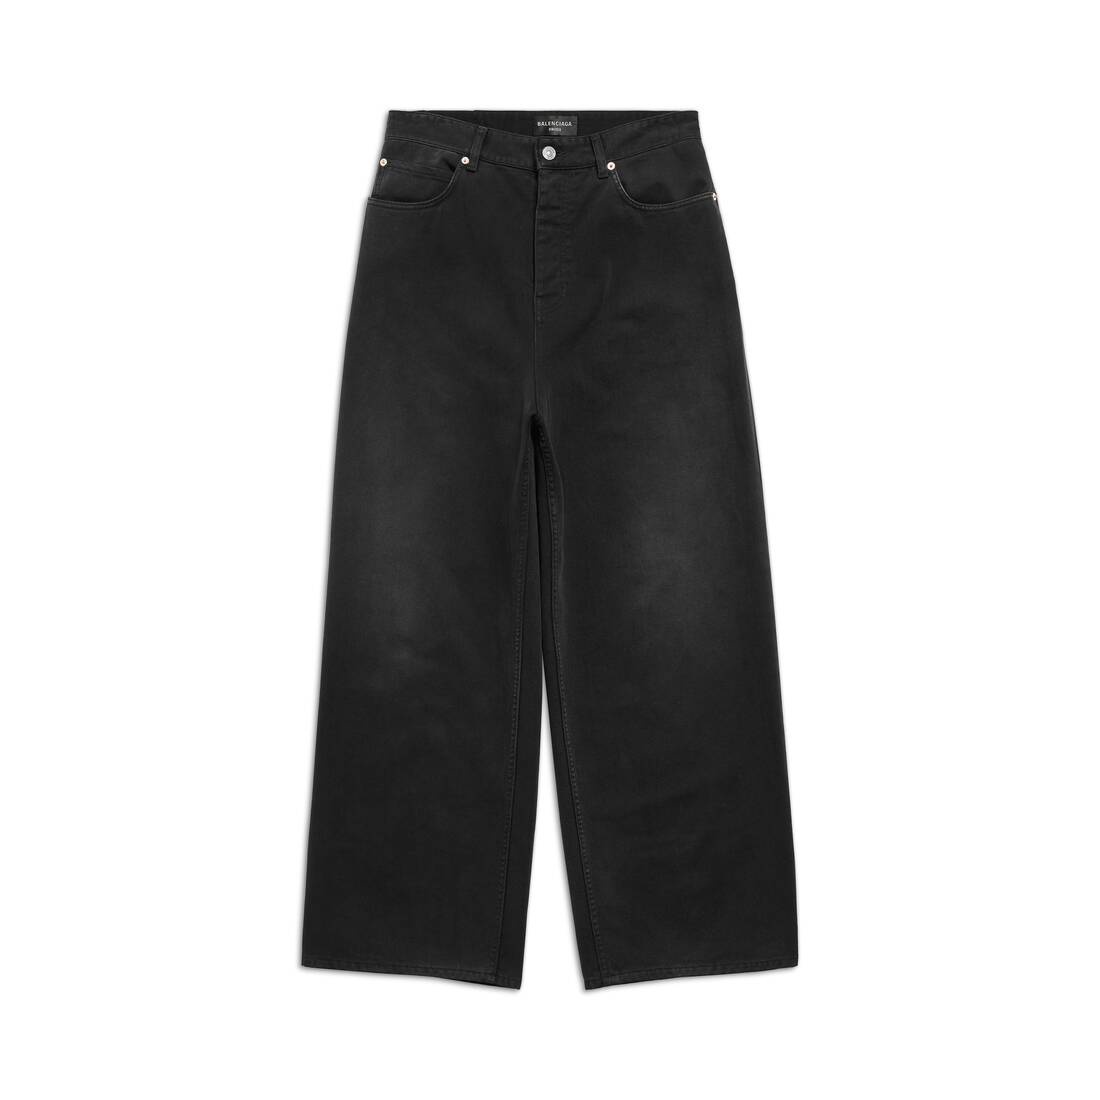 Baggy Pants in Black Faded - 1